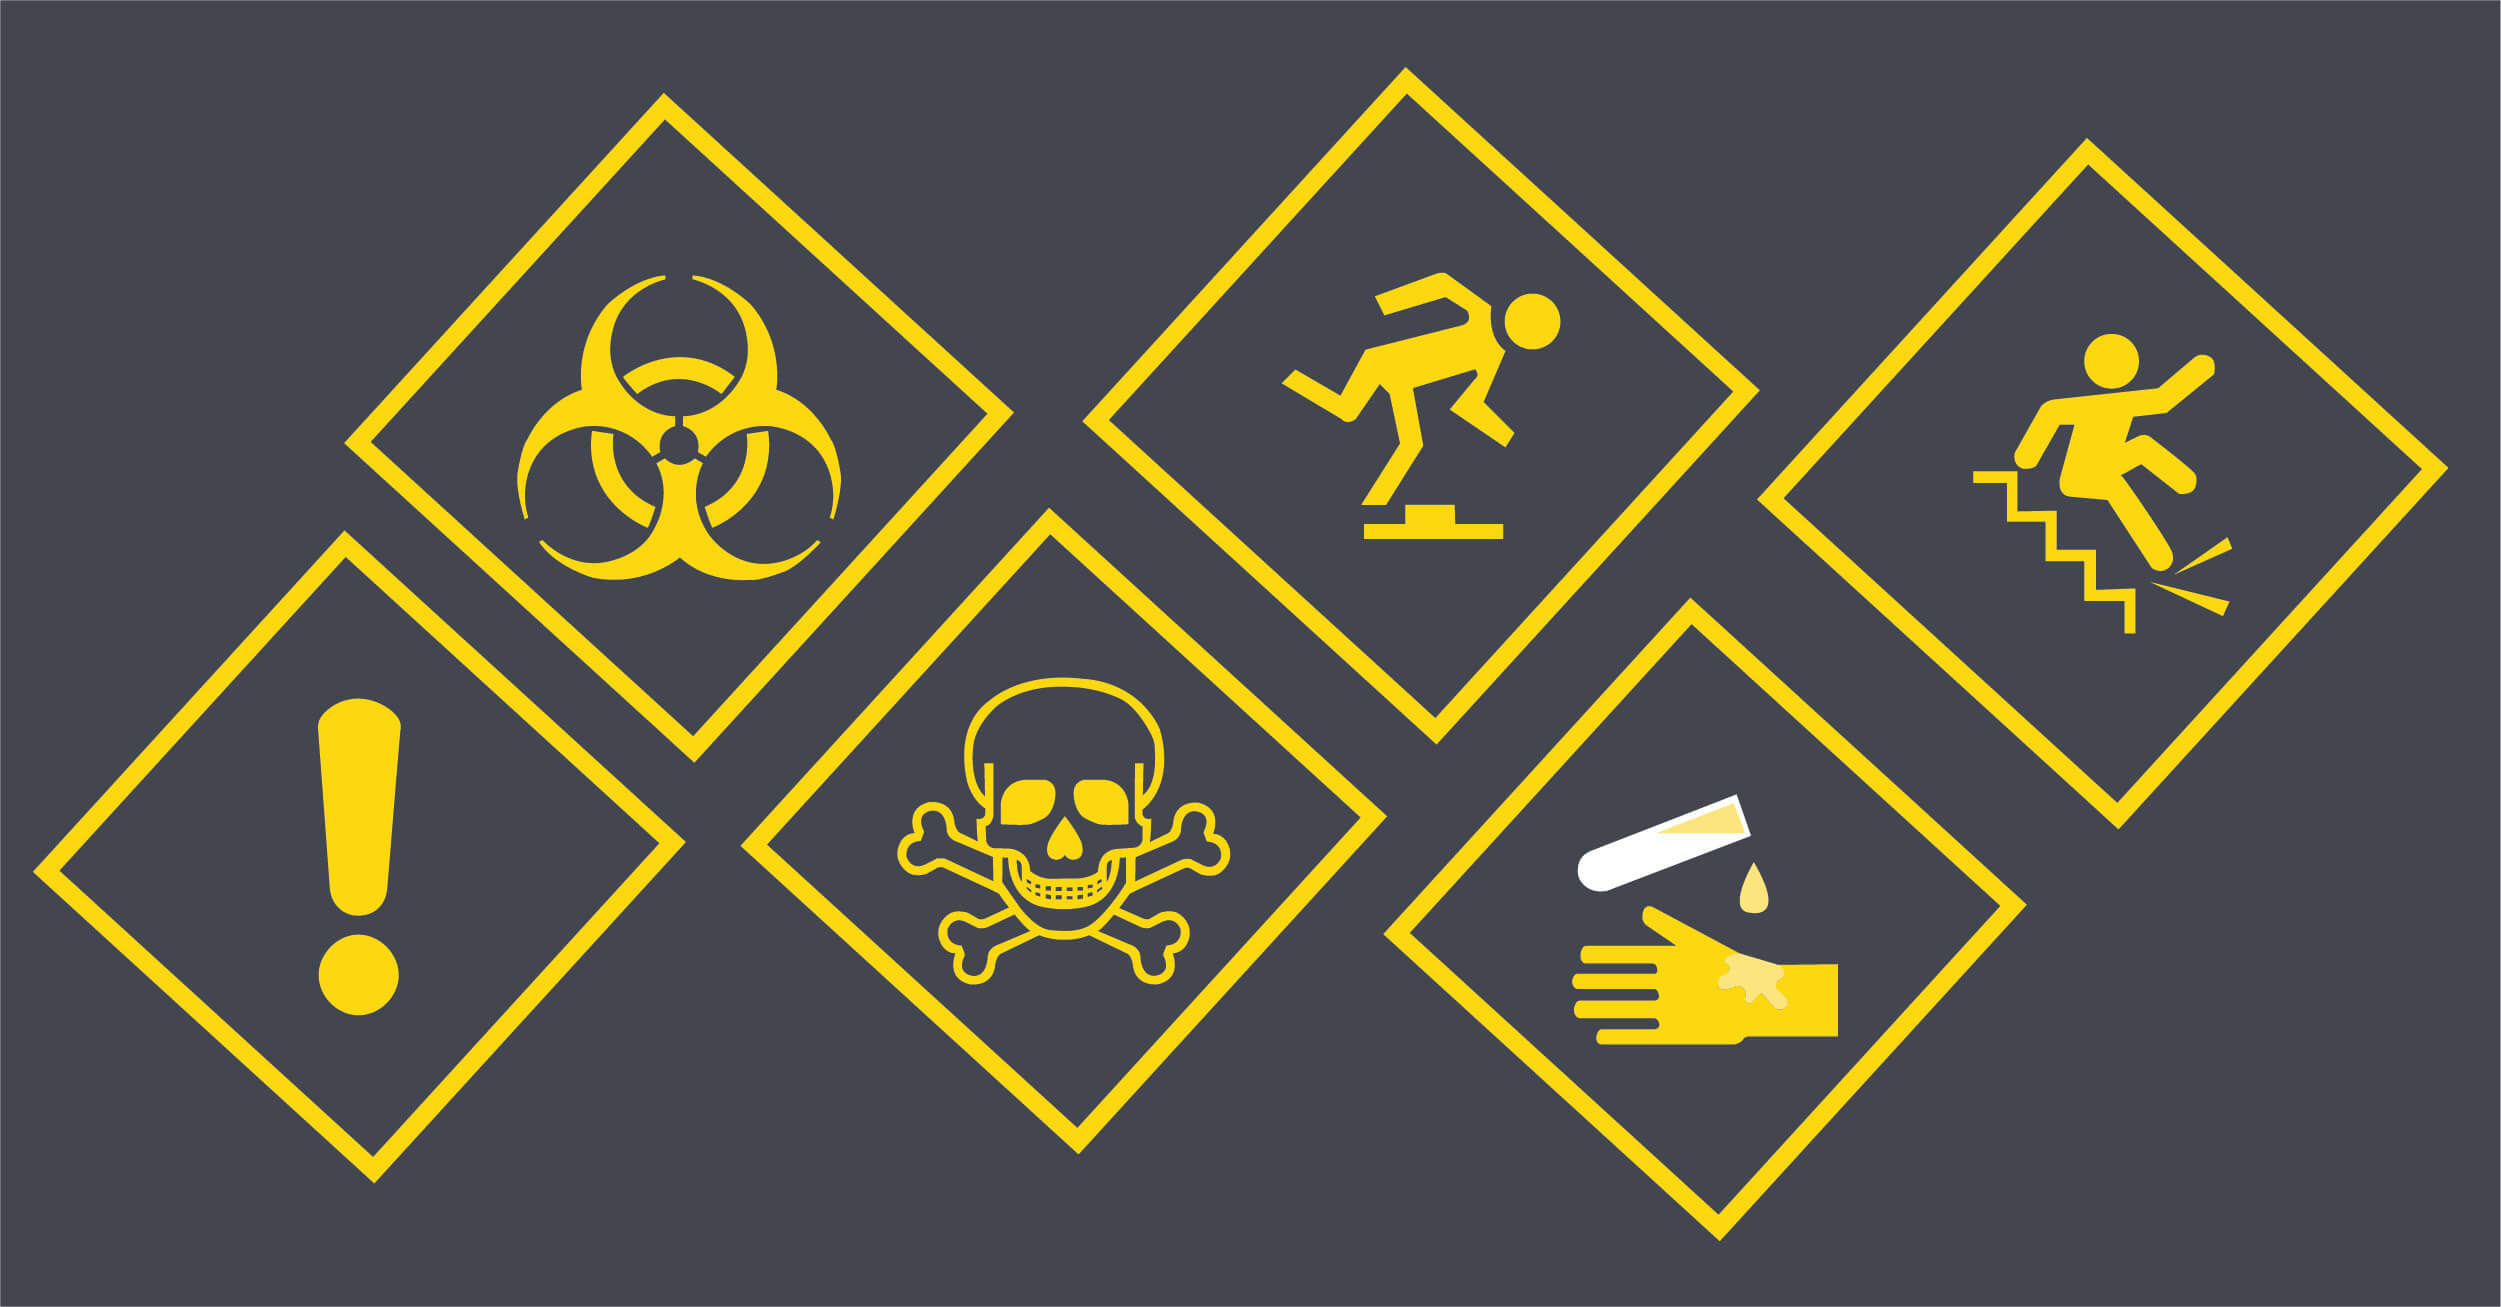 Staying Safe in the Chemical Industry